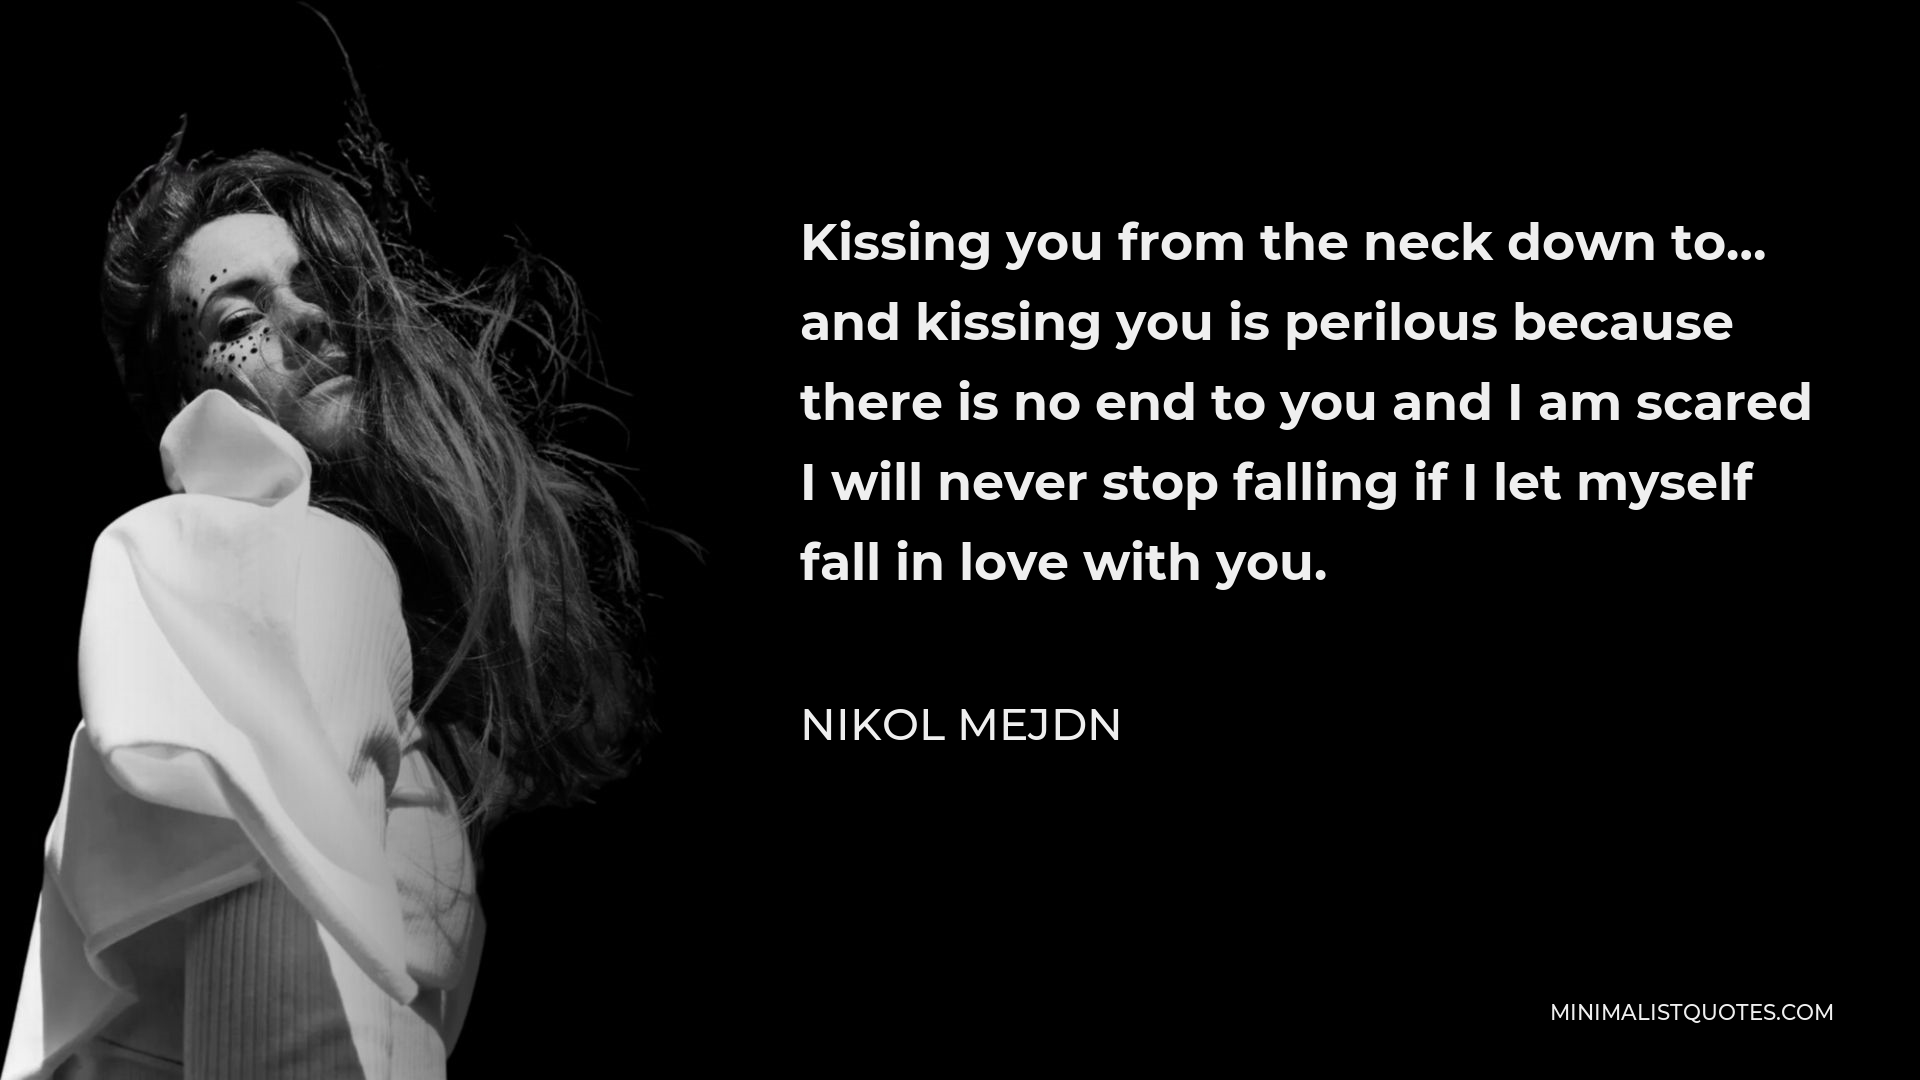 Nikol Mejdn Quote - Kissing you from the neck down to… and kissing you is perilous because there is no end to you and I am scared I will never stop falling if I let myself fall in love with you.